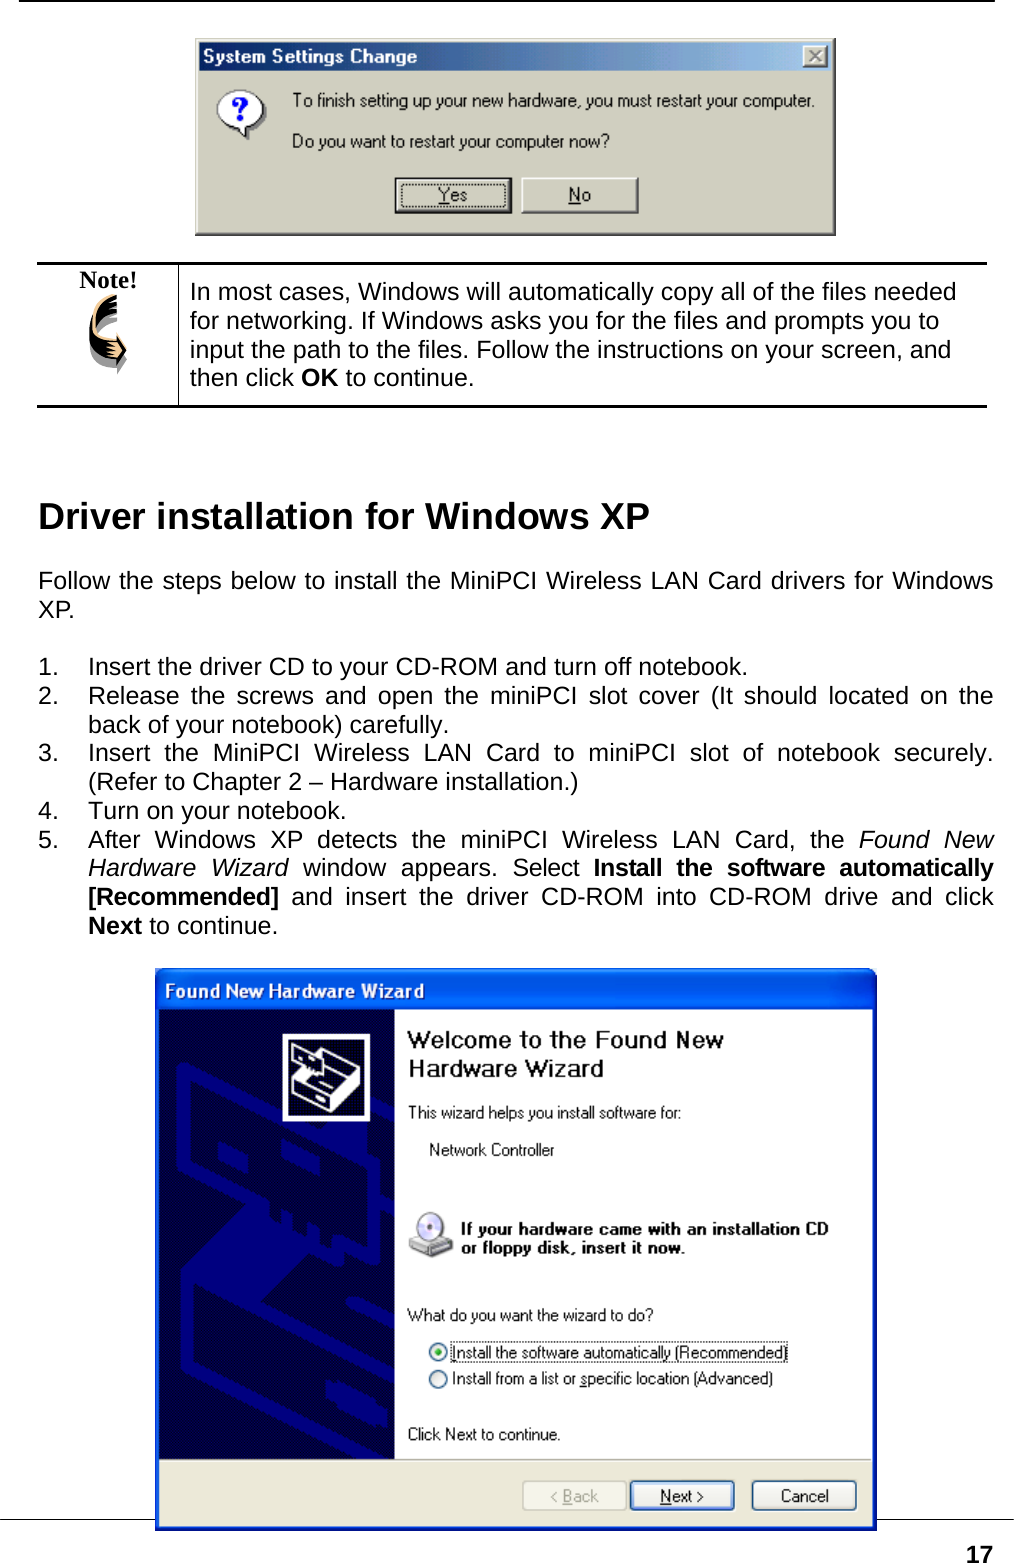   17  Note!  In most cases, Windows will automatically copy all of the files needed for networking. If Windows asks you for the files and prompts you to input the path to the files. Follow the instructions on your screen, and then click OK to continue.    Driver installation for Windows XP  Follow the steps below to install the MiniPCI Wireless LAN Card drivers for Windows XP.  1.  Insert the driver CD to your CD-ROM and turn off notebook. 2.  Release the screws and open the miniPCI slot cover (It should located on the back of your notebook) carefully. 3.  Insert the MiniPCI Wireless LAN Card to miniPCI slot of notebook securely. (Refer to Chapter 2 – Hardware installation.) 4.  Turn on your notebook. 5.  After Windows XP detects the miniPCI Wireless LAN Card, the Found New Hardware Wizard window appears. Select Install the software automatically [Recommended] and insert the driver CD-ROM into CD-ROM drive and click Next to continue.   